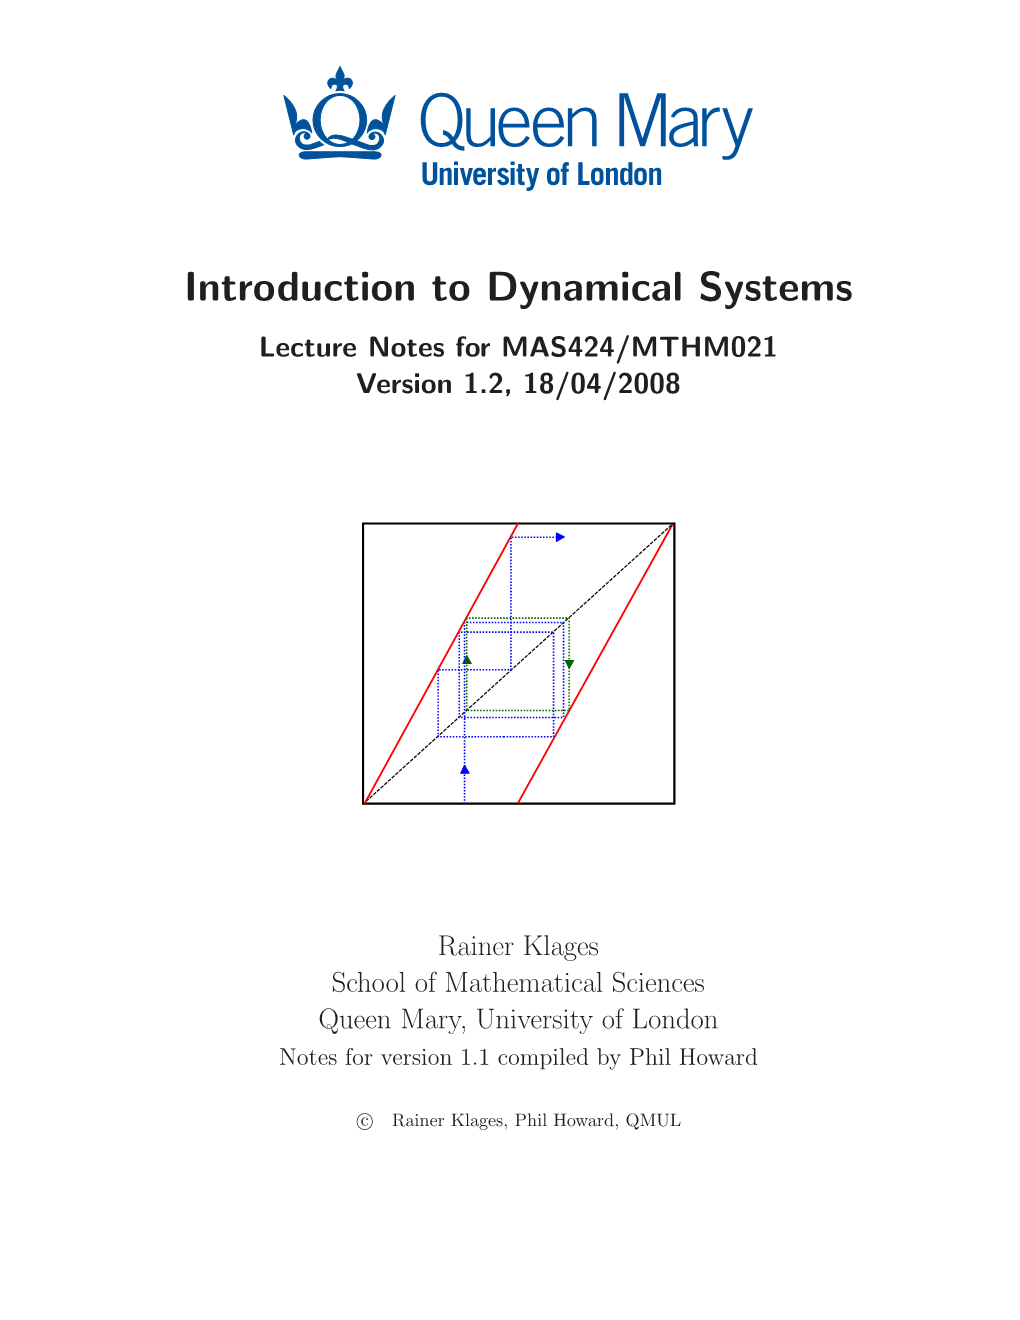 Introduction to Dynamical Systems Lecture Notes for MAS424/MTHM021 Version 1.2, 18/04/2008